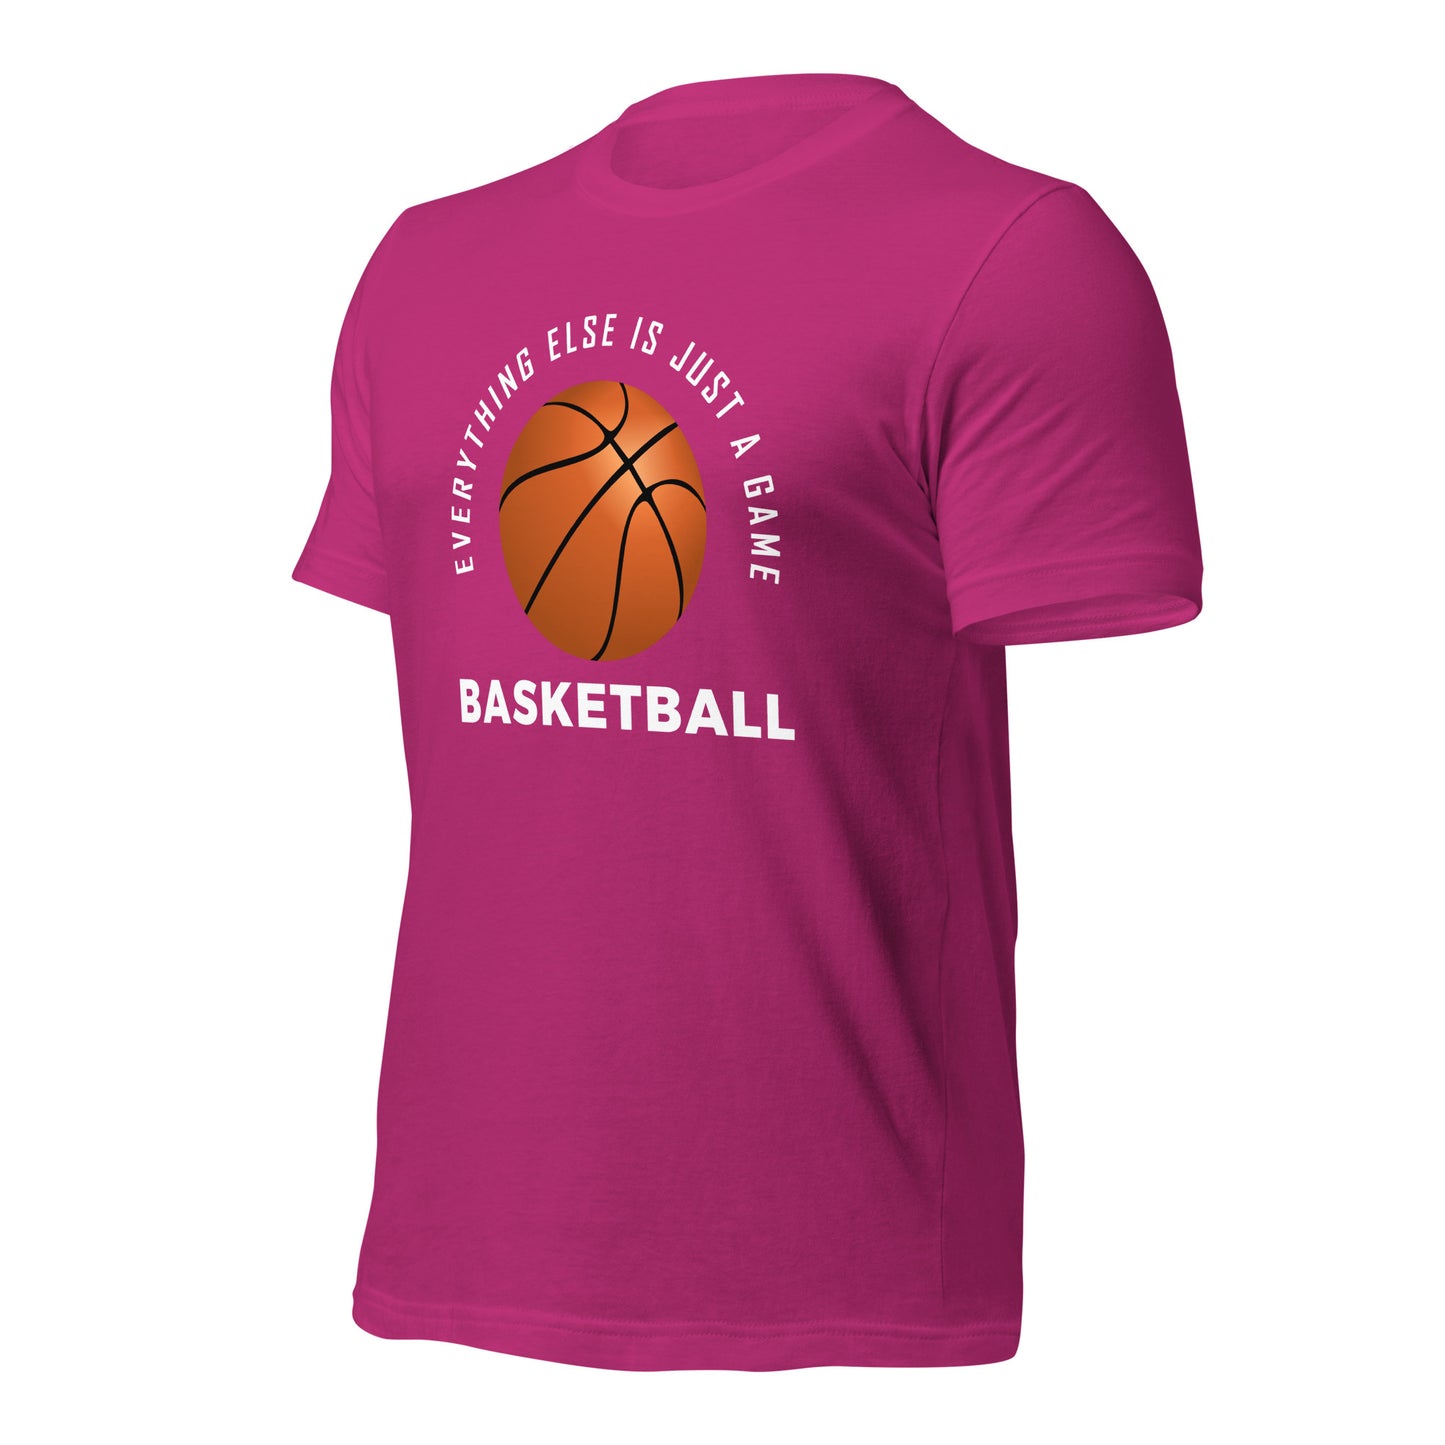 “Basketball, Everything Else Is Just A Game” T-Shirt - Weave Got Gifts - Unique Gifts You Won’t Find Anywhere Else!